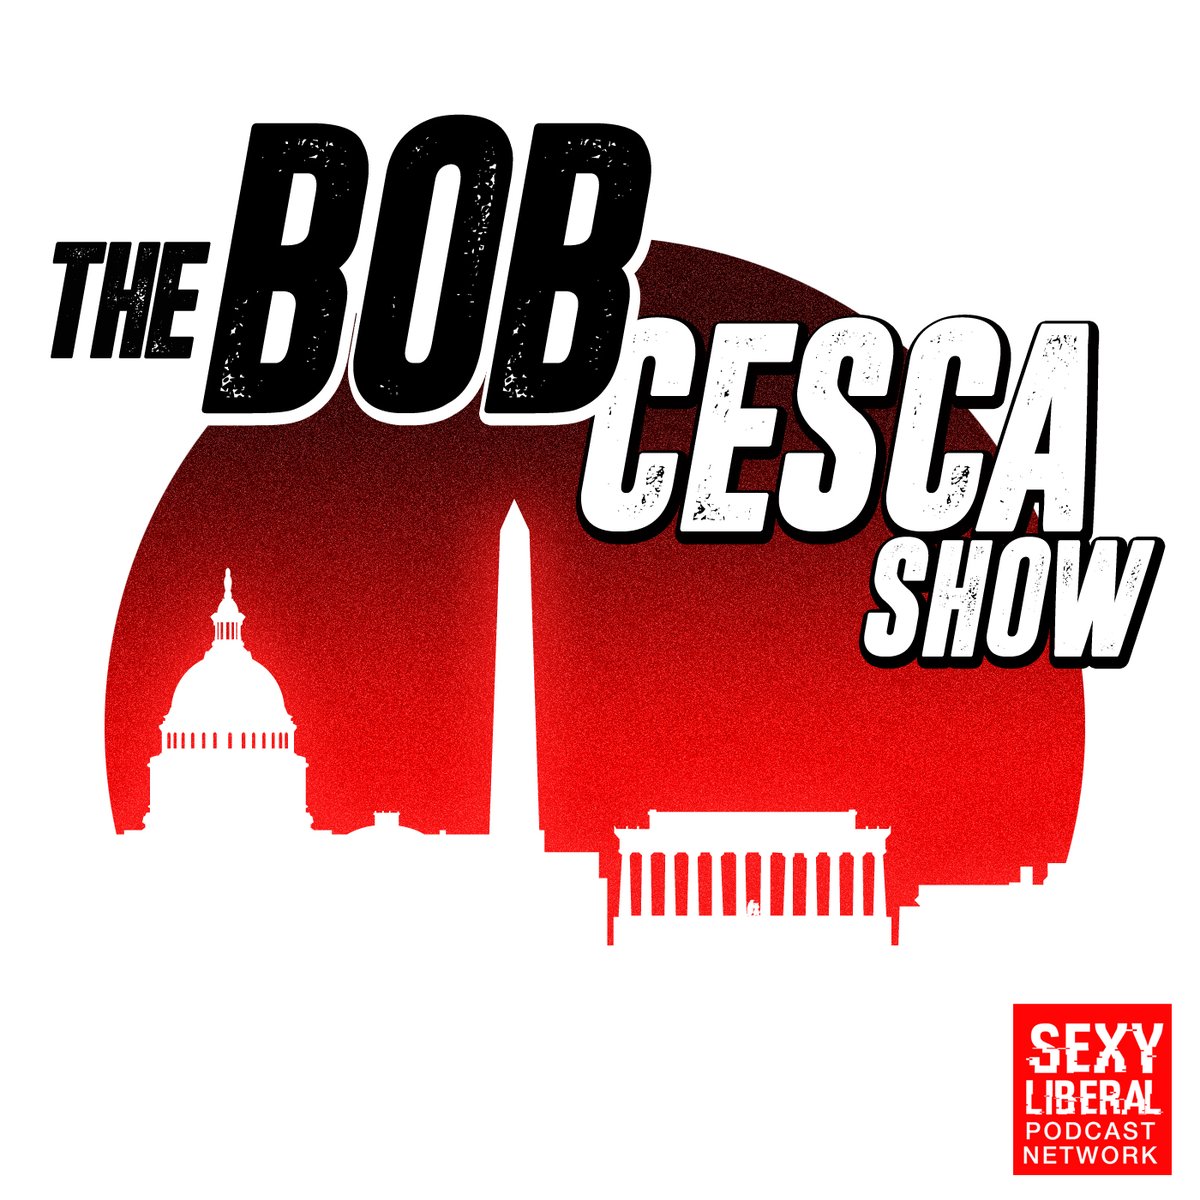 Bob Cesca, host of “The Bob Cesca Show” podcast, is joining us next to talk about Rudy's lawsuit, Comer's missing informant, and the dud FBI/Russia report. @bobcesca_go #SexyLiberal #SexyLibArmy #HiBob bobcesca.com